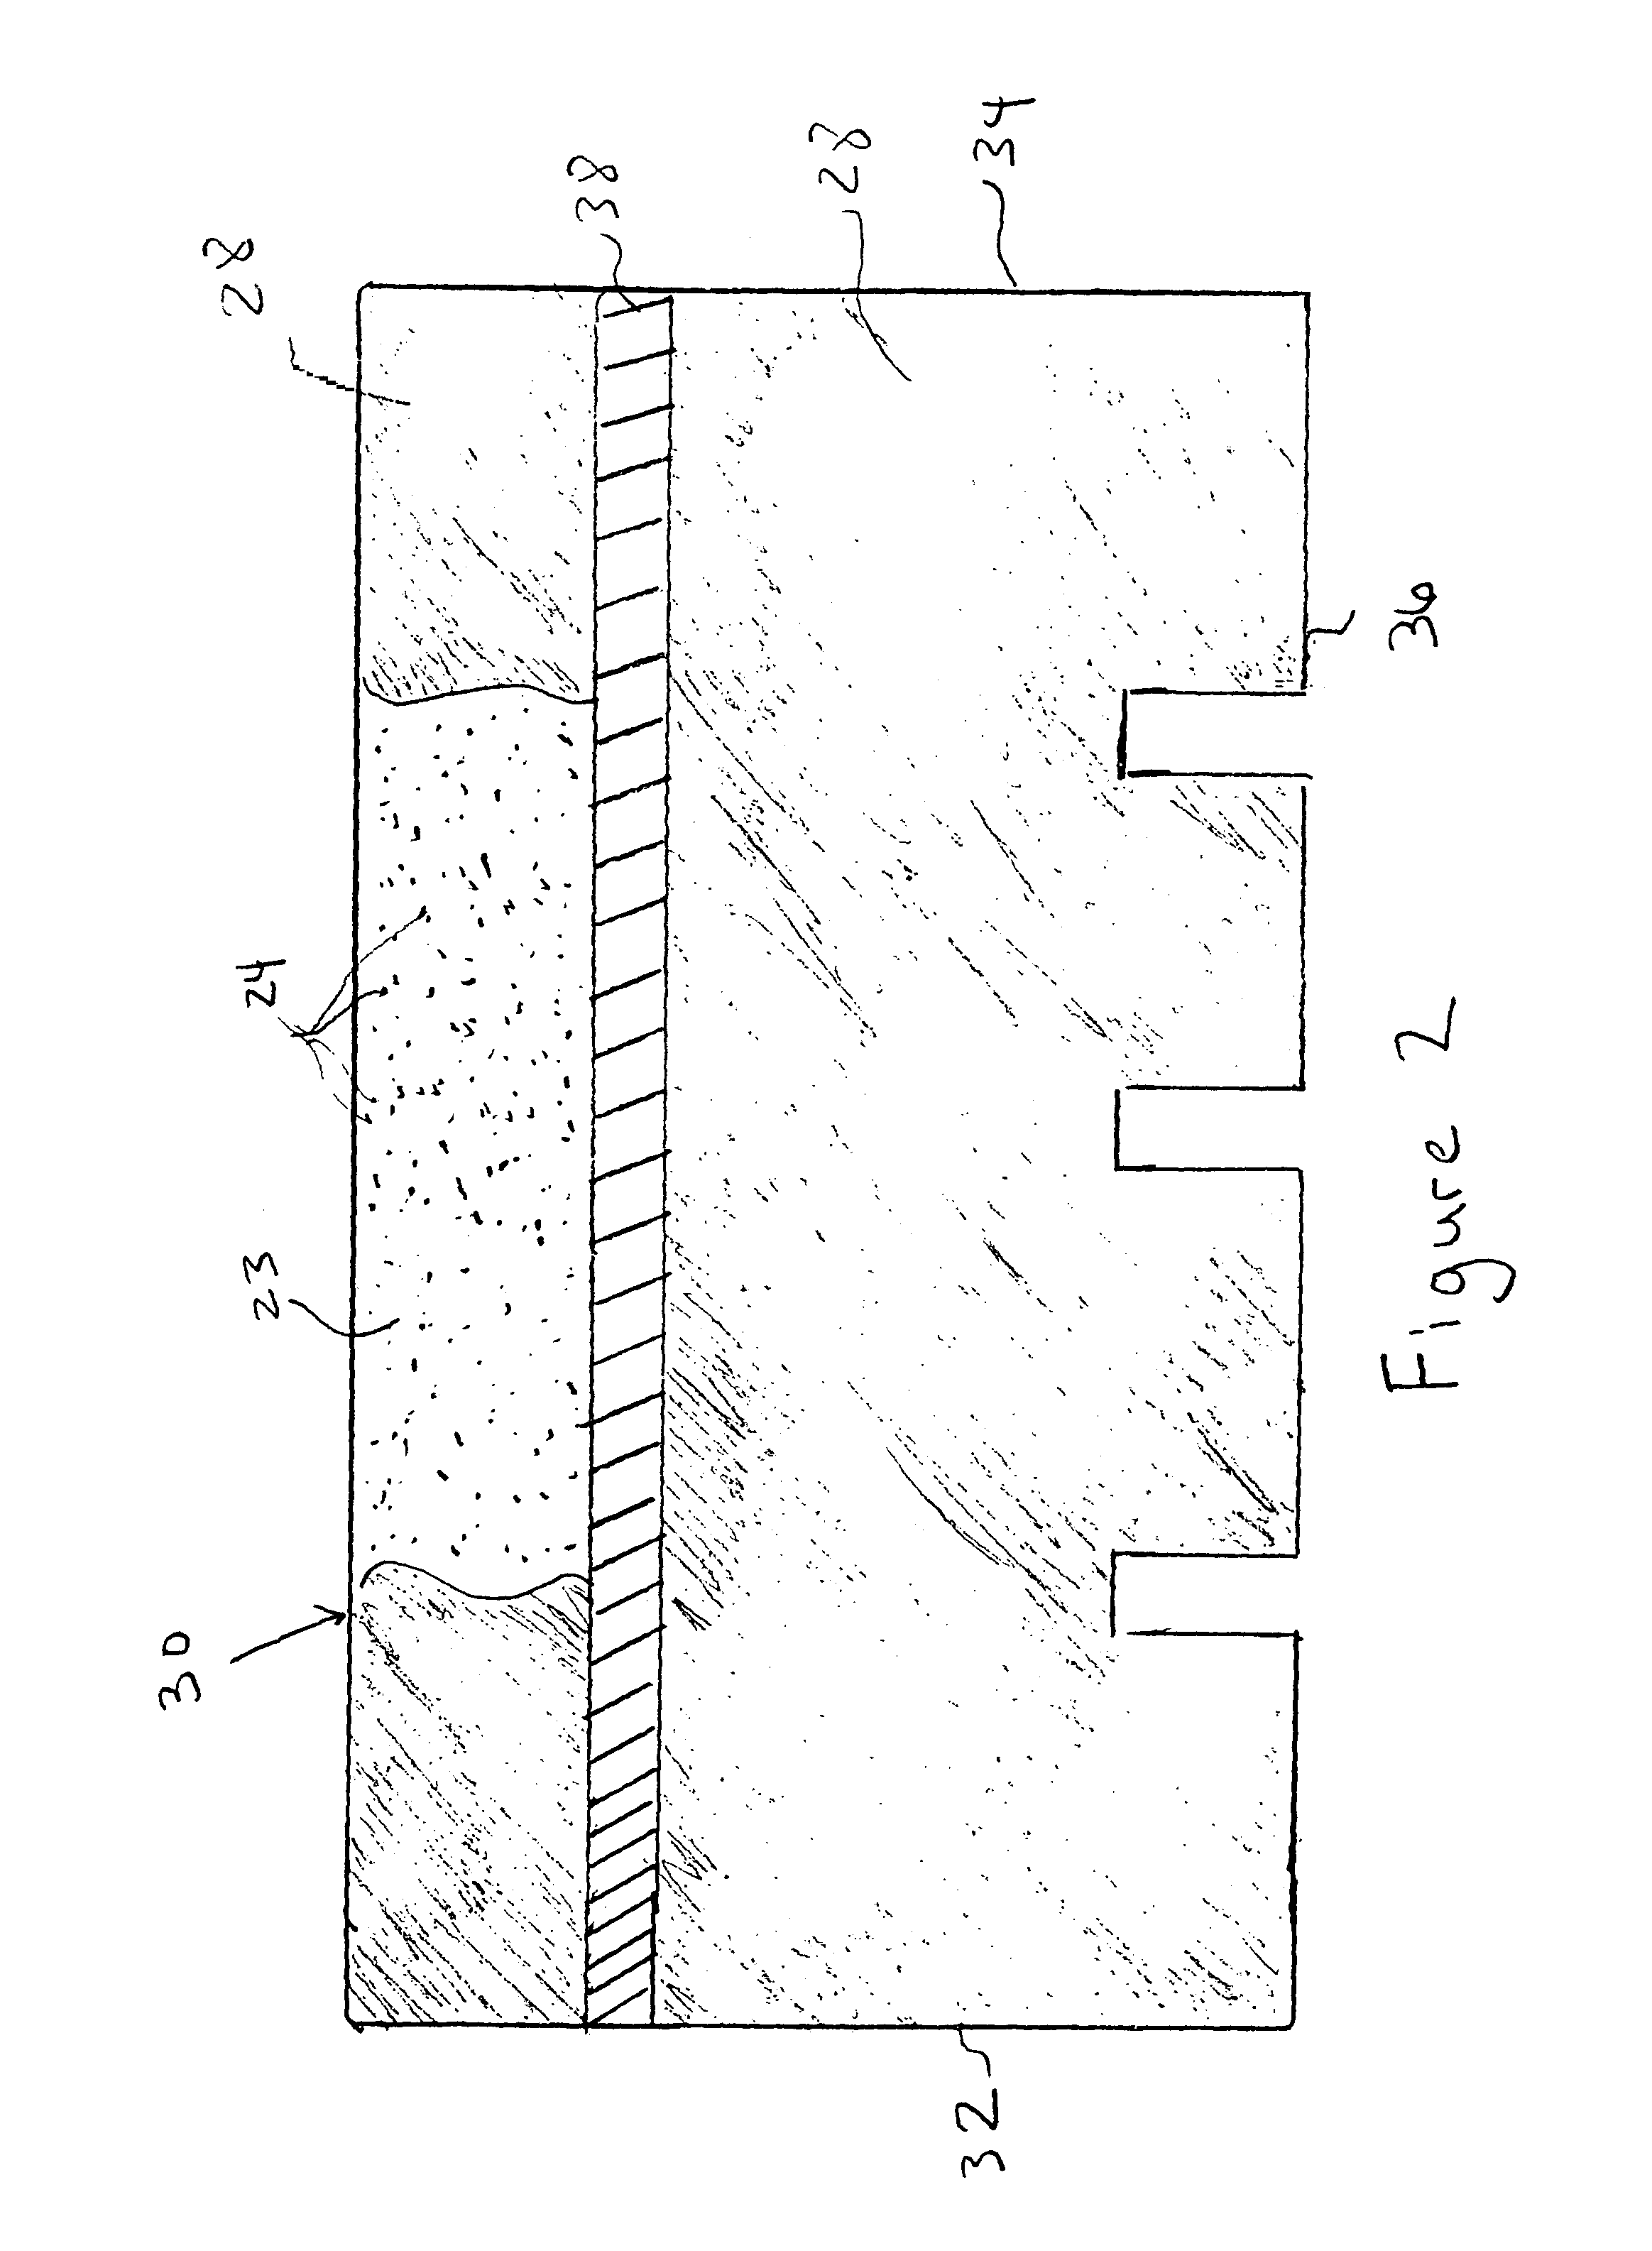 Composition and method of sealing and protecting asphalt shingles or other porous roofing and construction materials